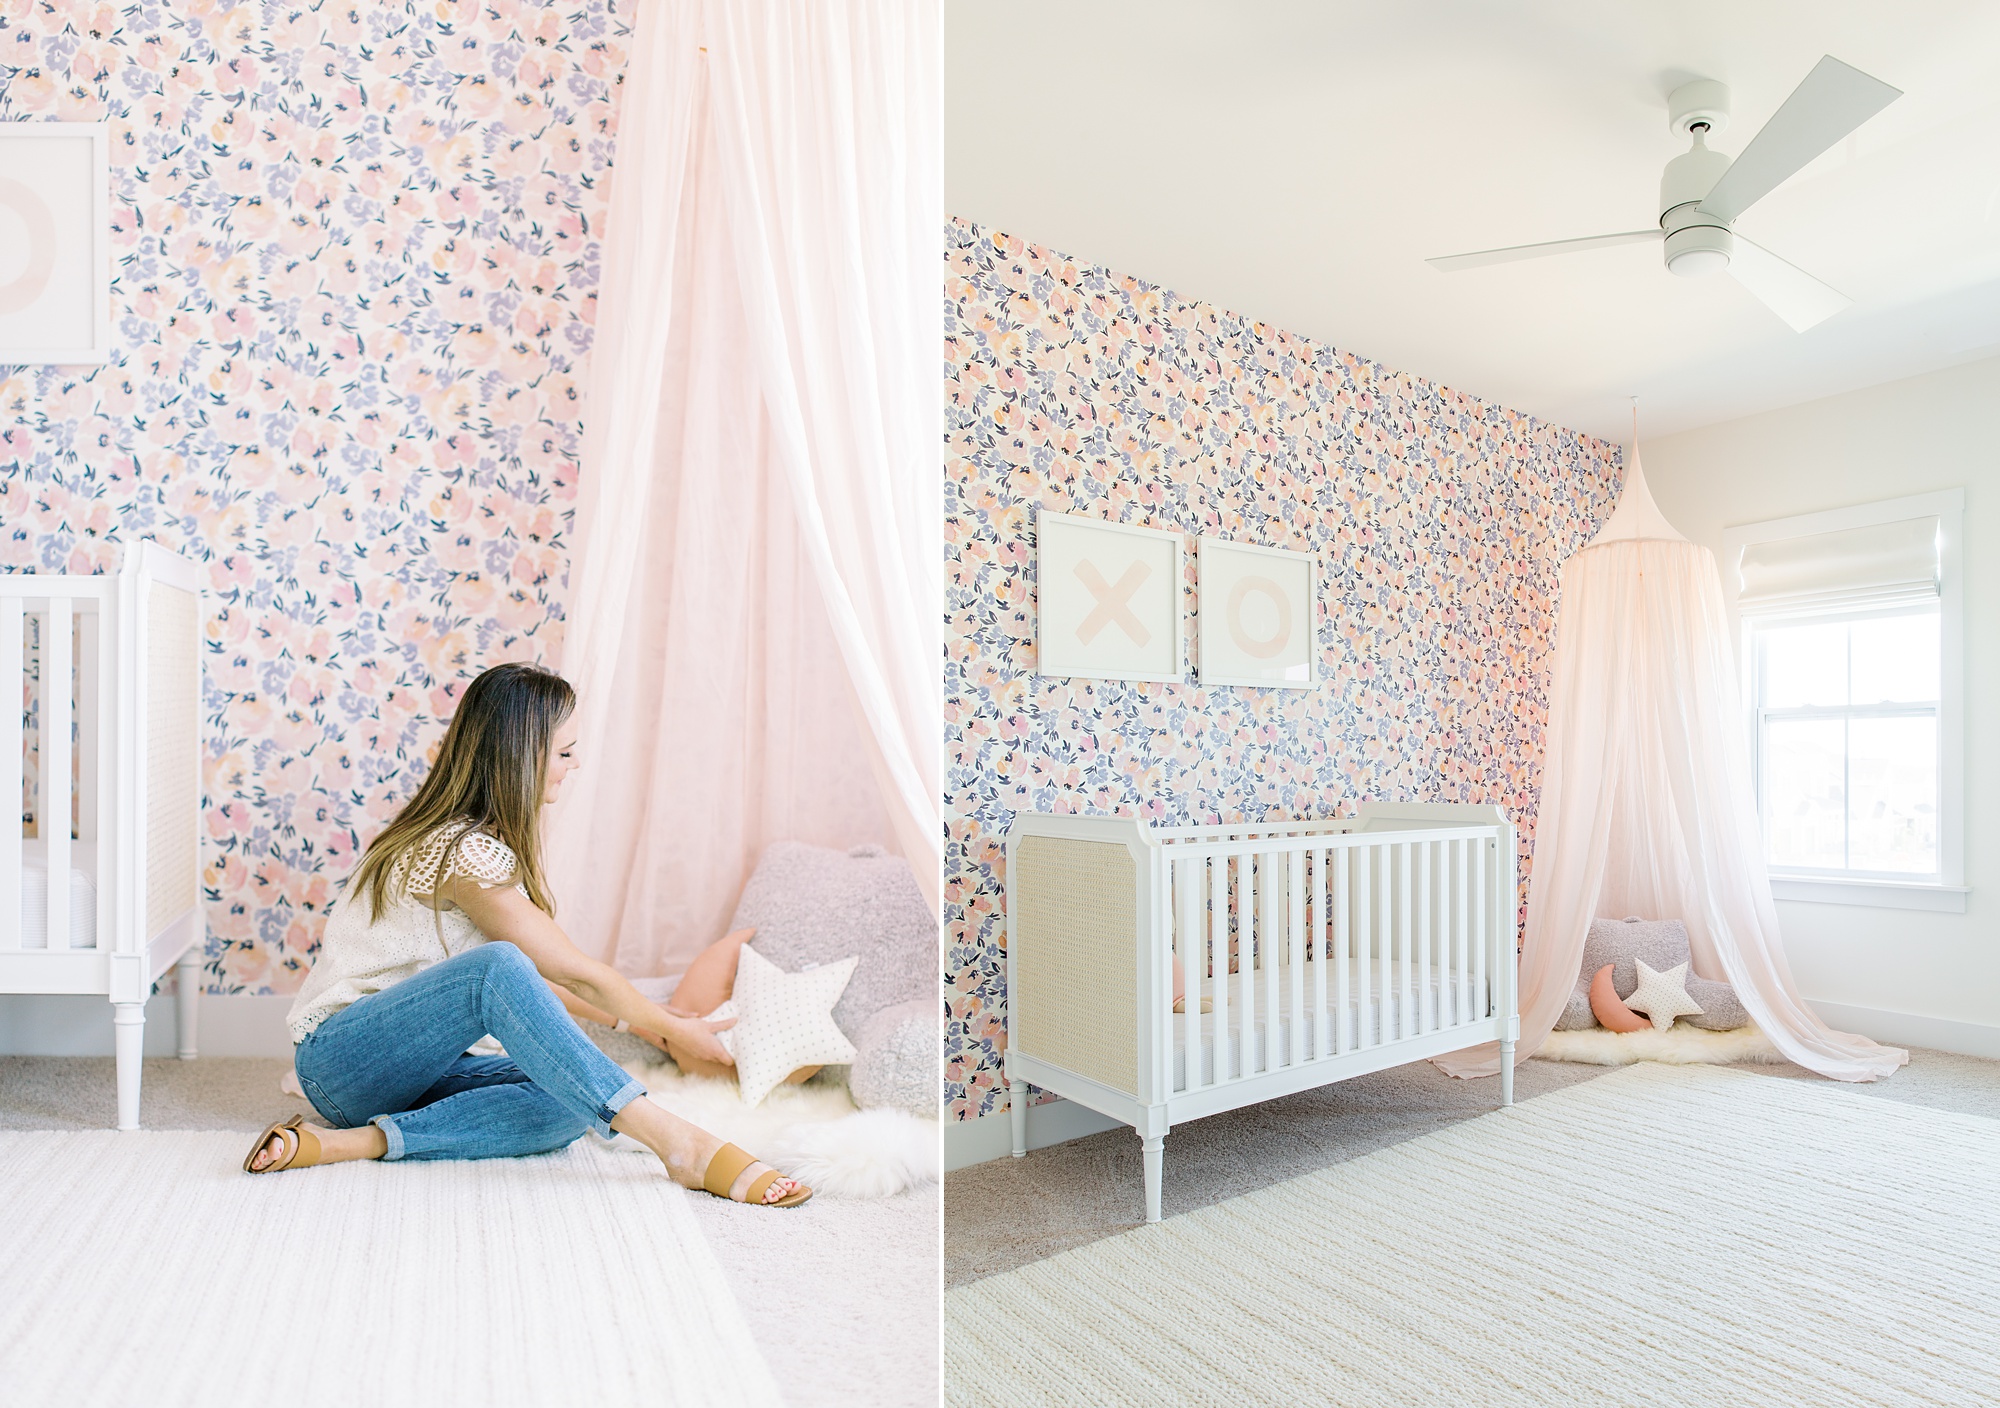 designer adjusts pillows in tent for girl's room